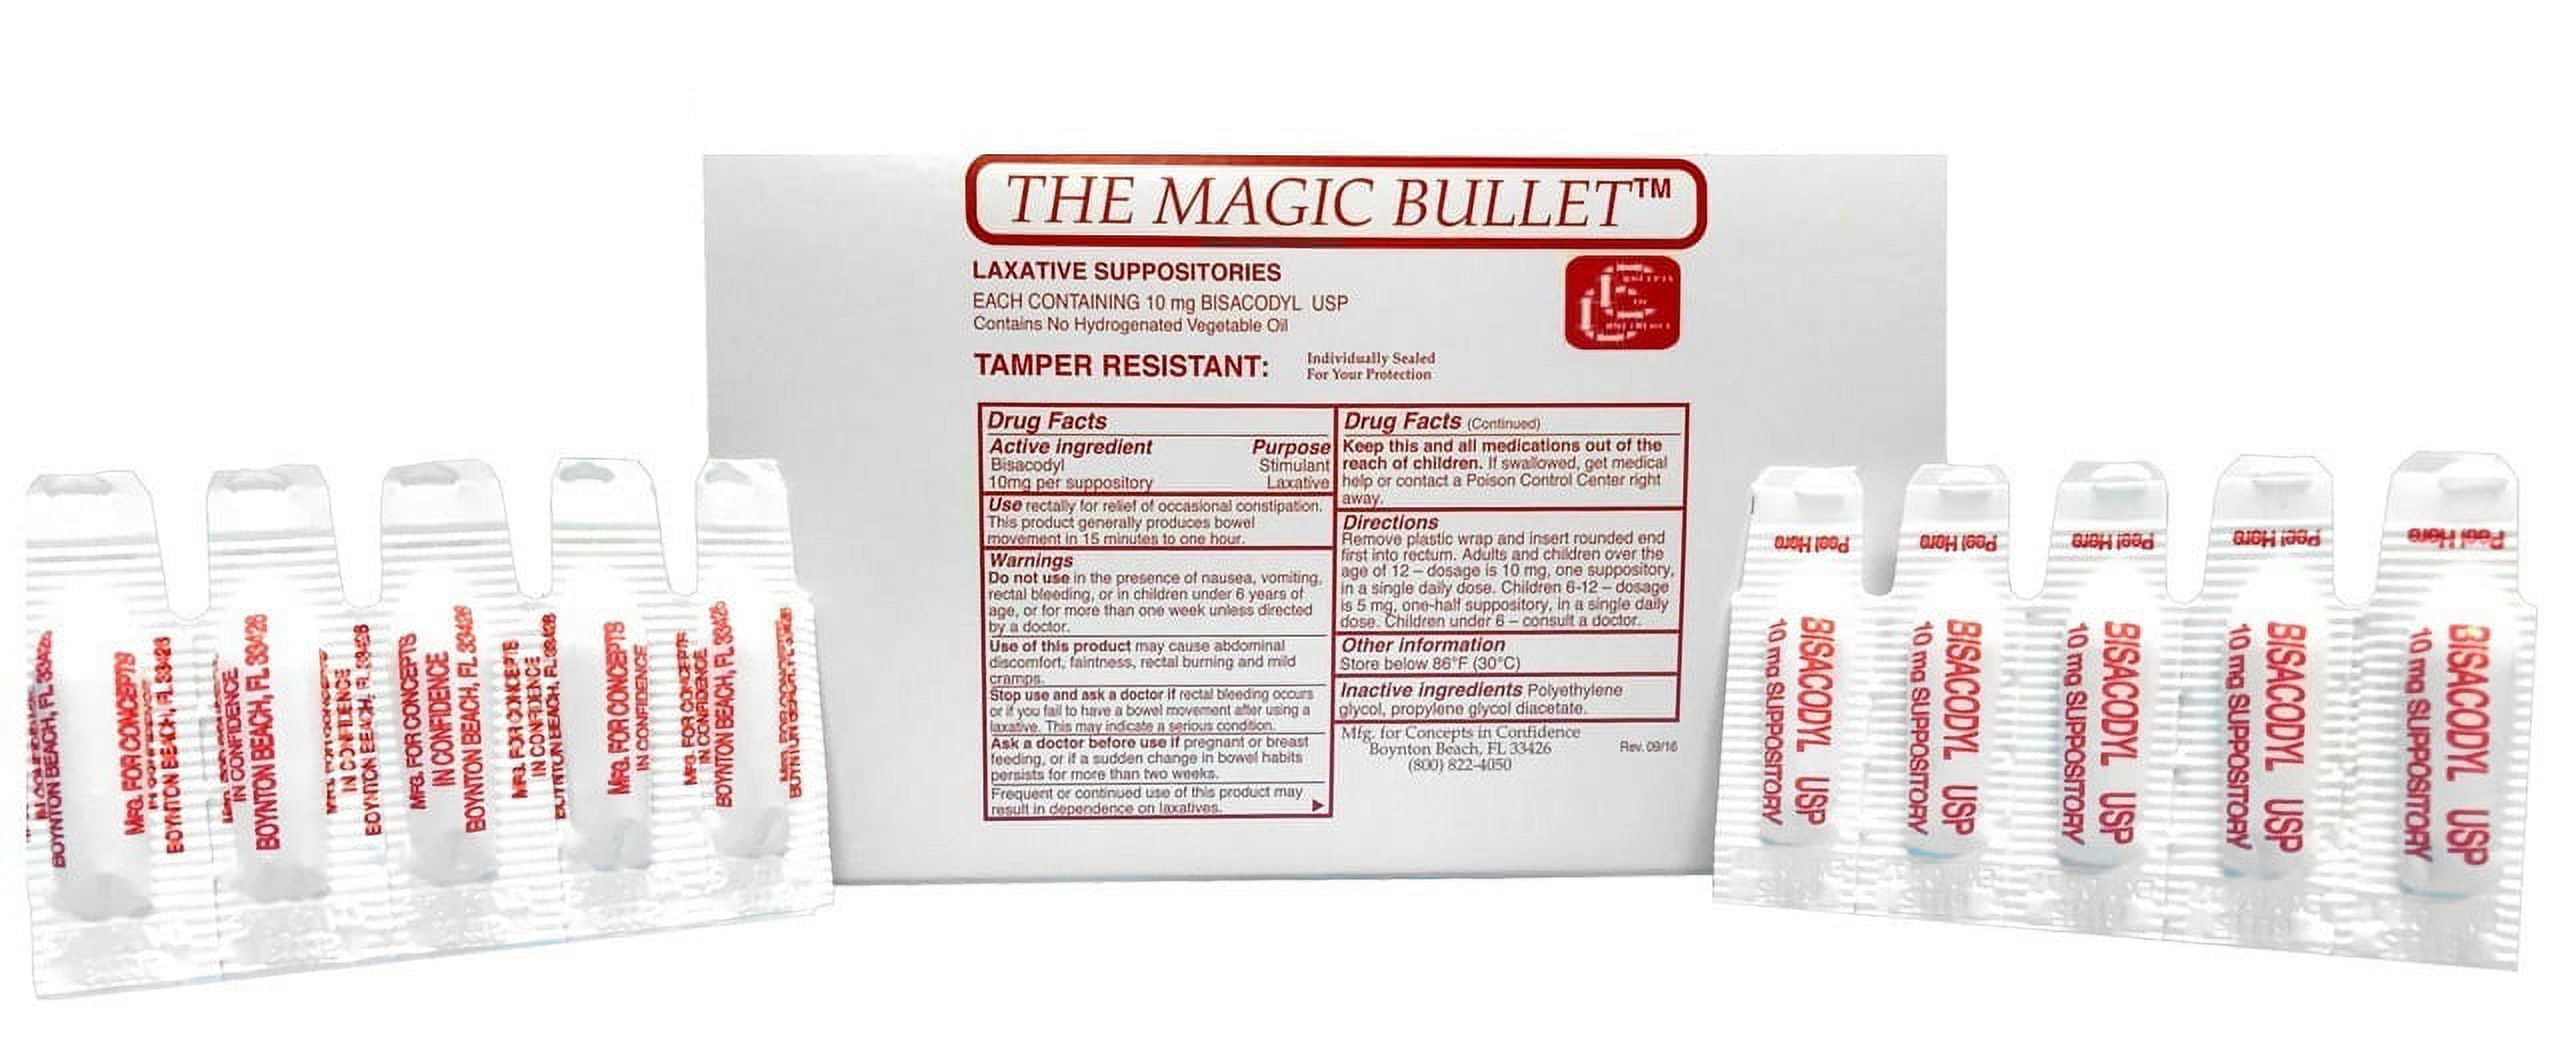 The Magic Bullet Suppository Ingredients - Concepts In Confidence